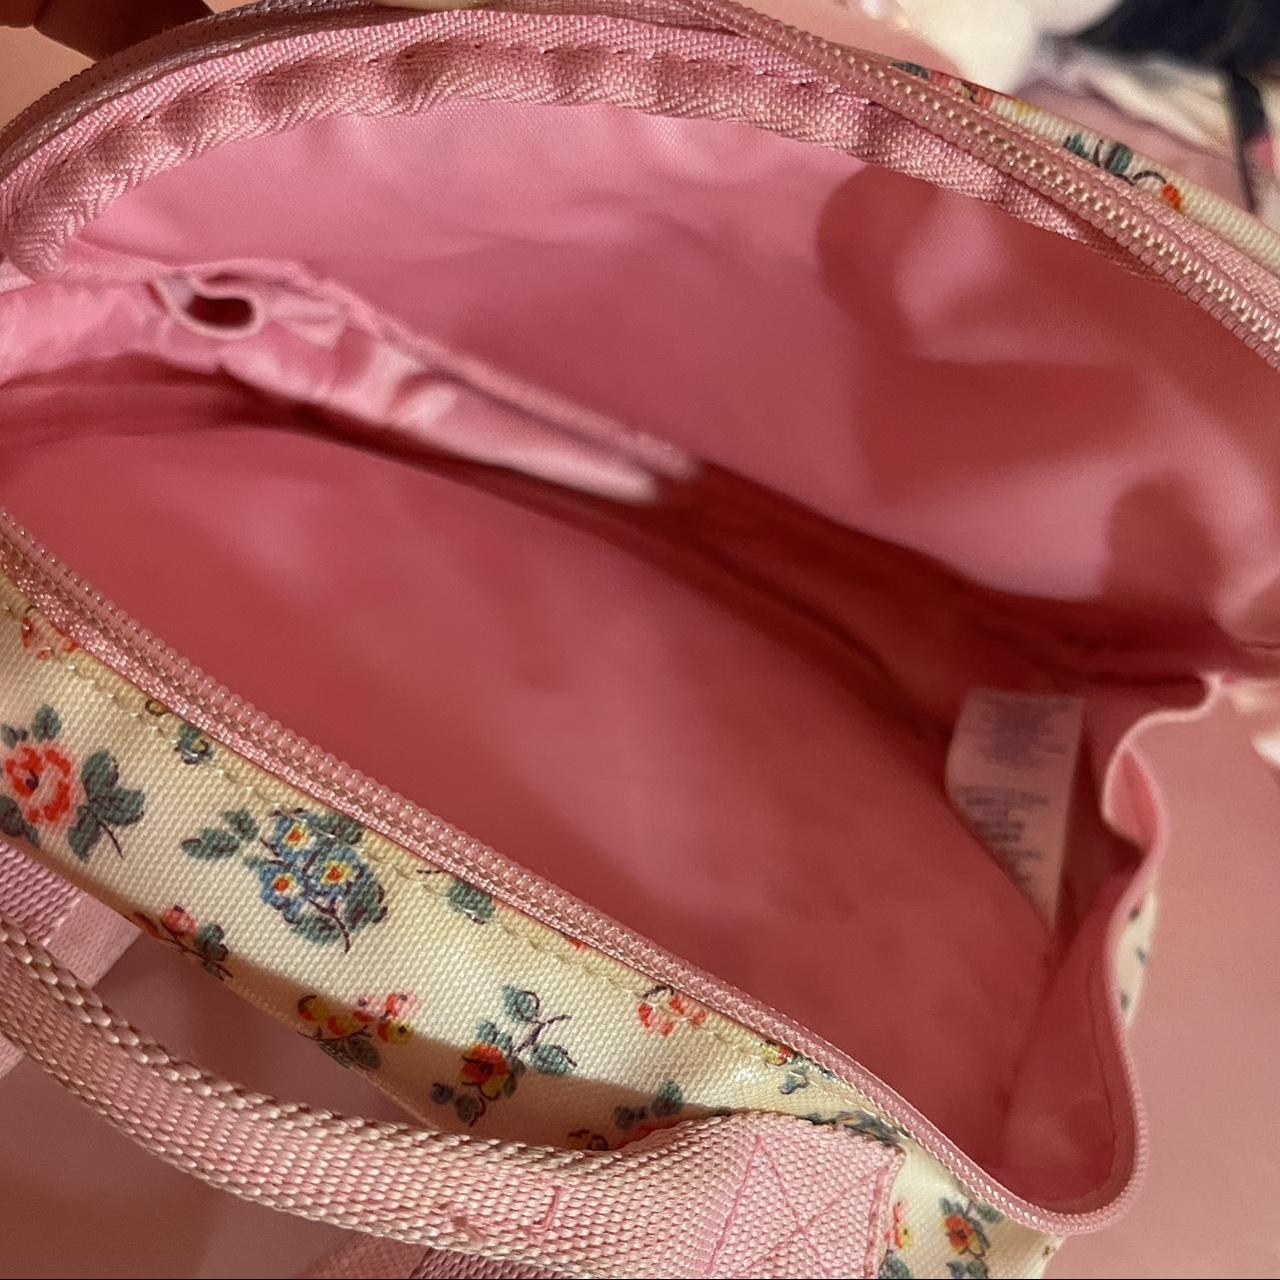 Cath Kidston Women's White and Pink Bag (4)